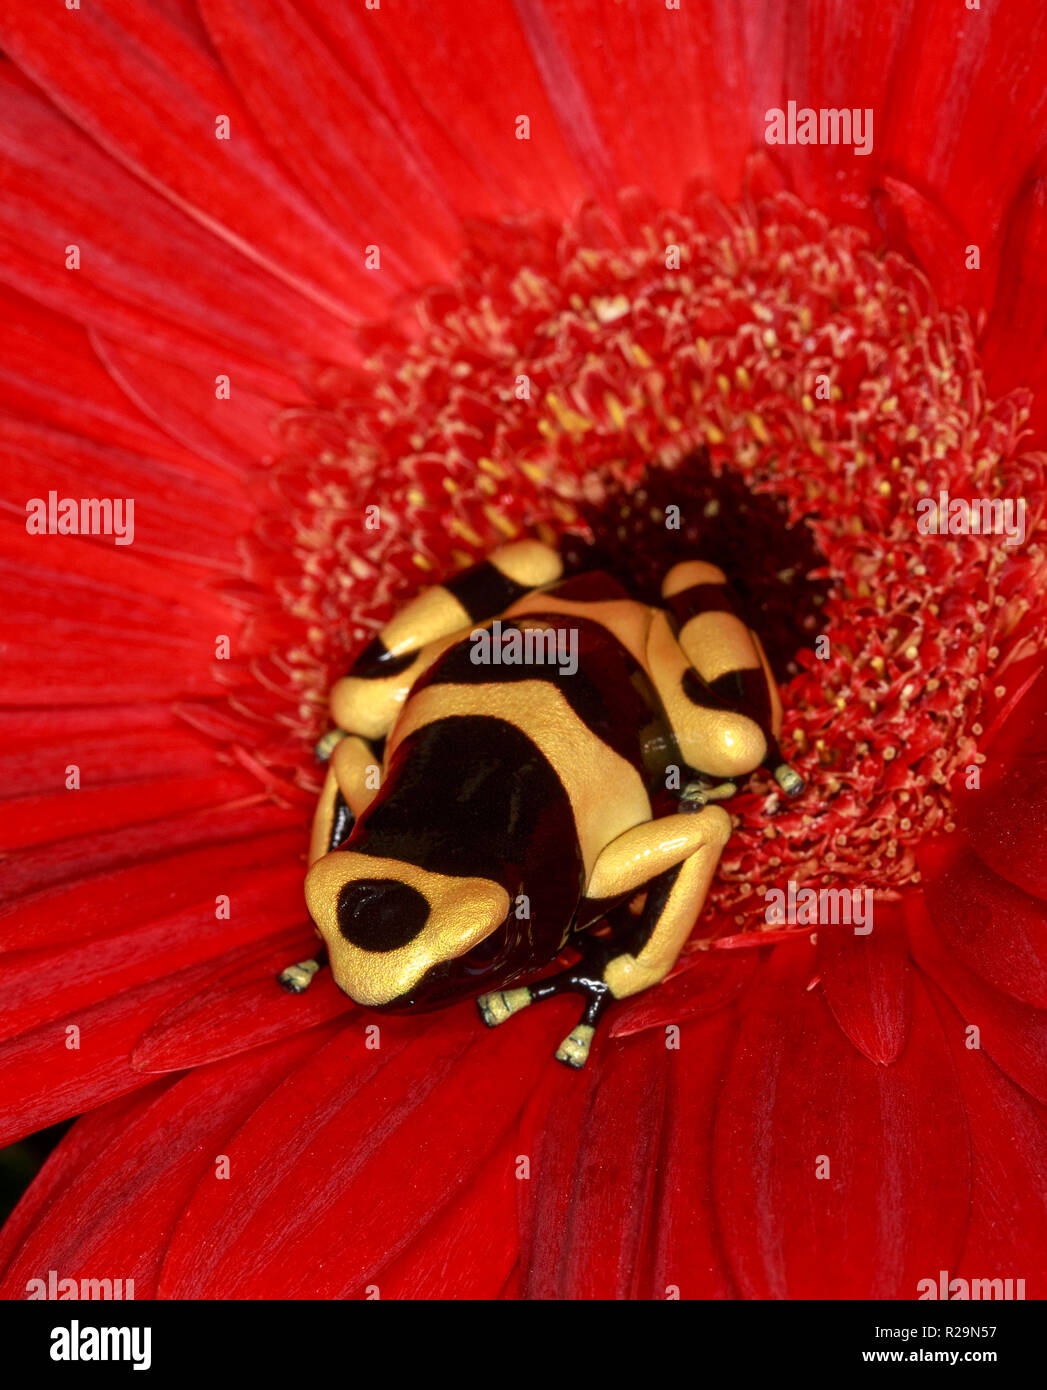 Yellow Banded Poison Frog (Dendrobates leucomelas)  on red flower (gerbera daisy) Stock Photo